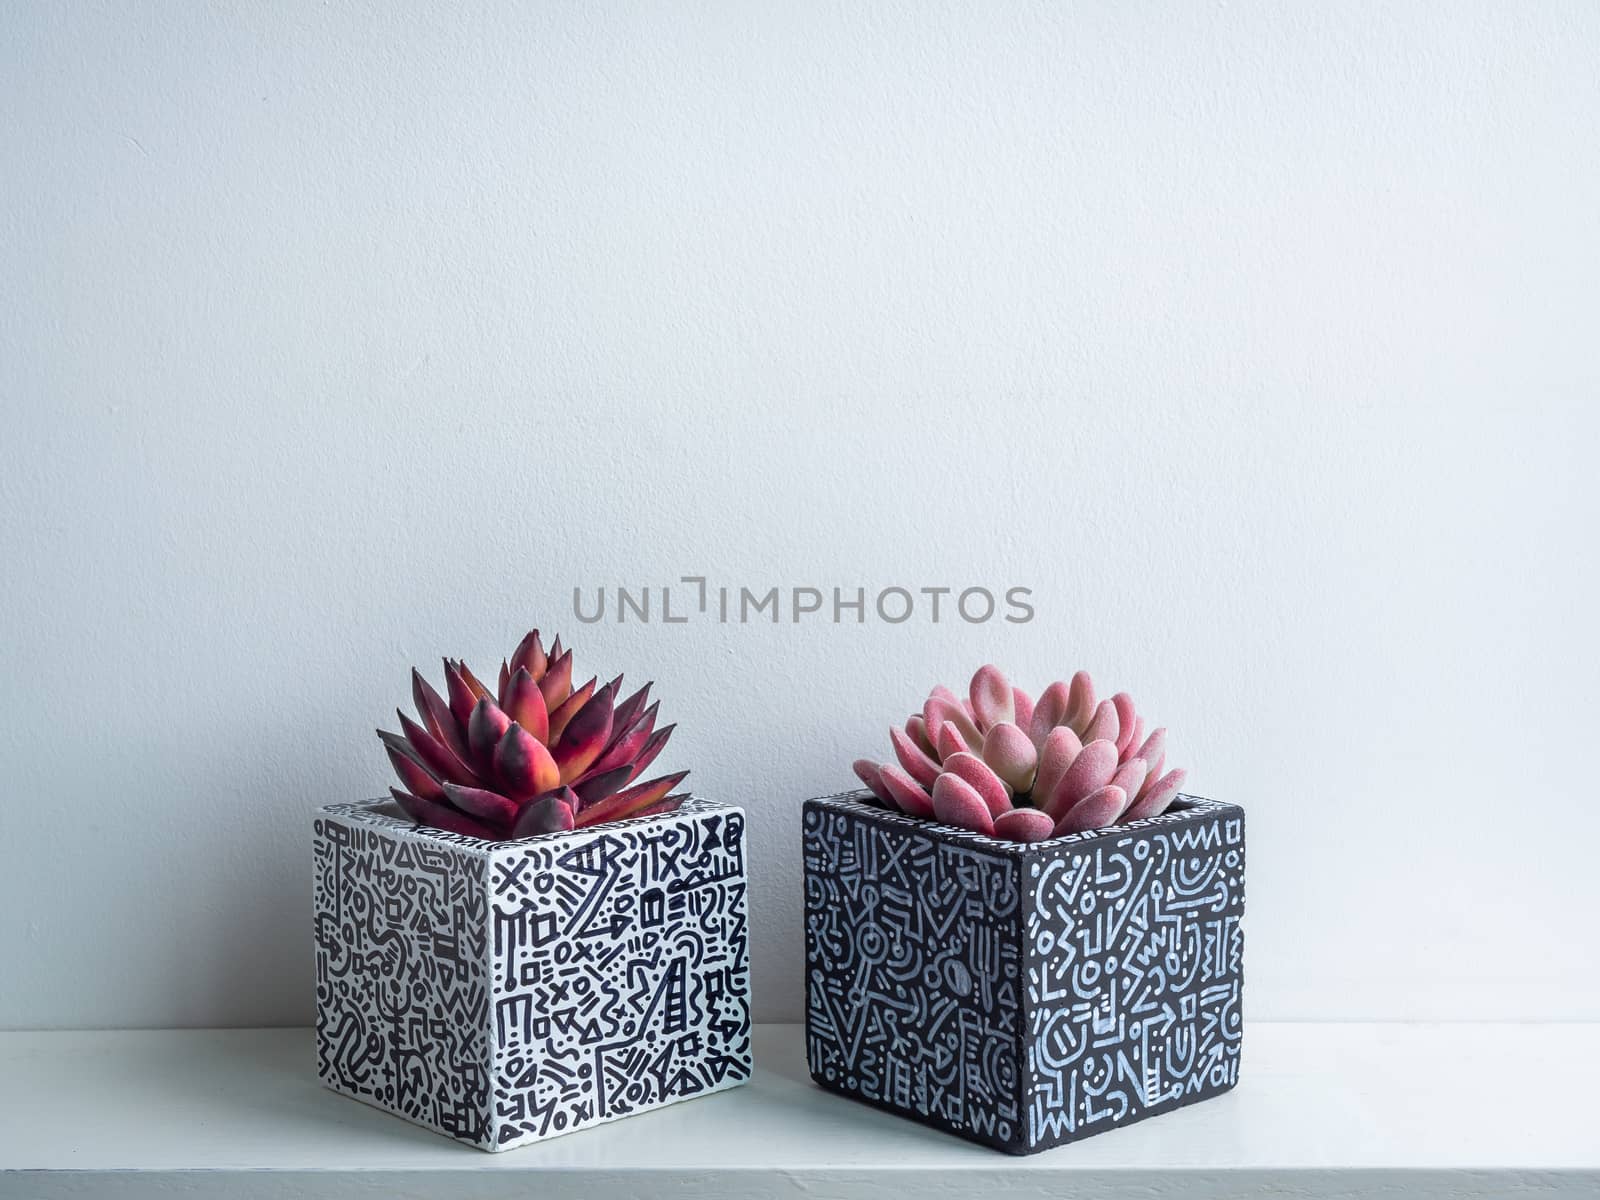 Cactus pot. Concrete pot. Empty white with modern graphic pattern geometric concrete planters with succulent plants on white wooden shelf isolated on white wall background.